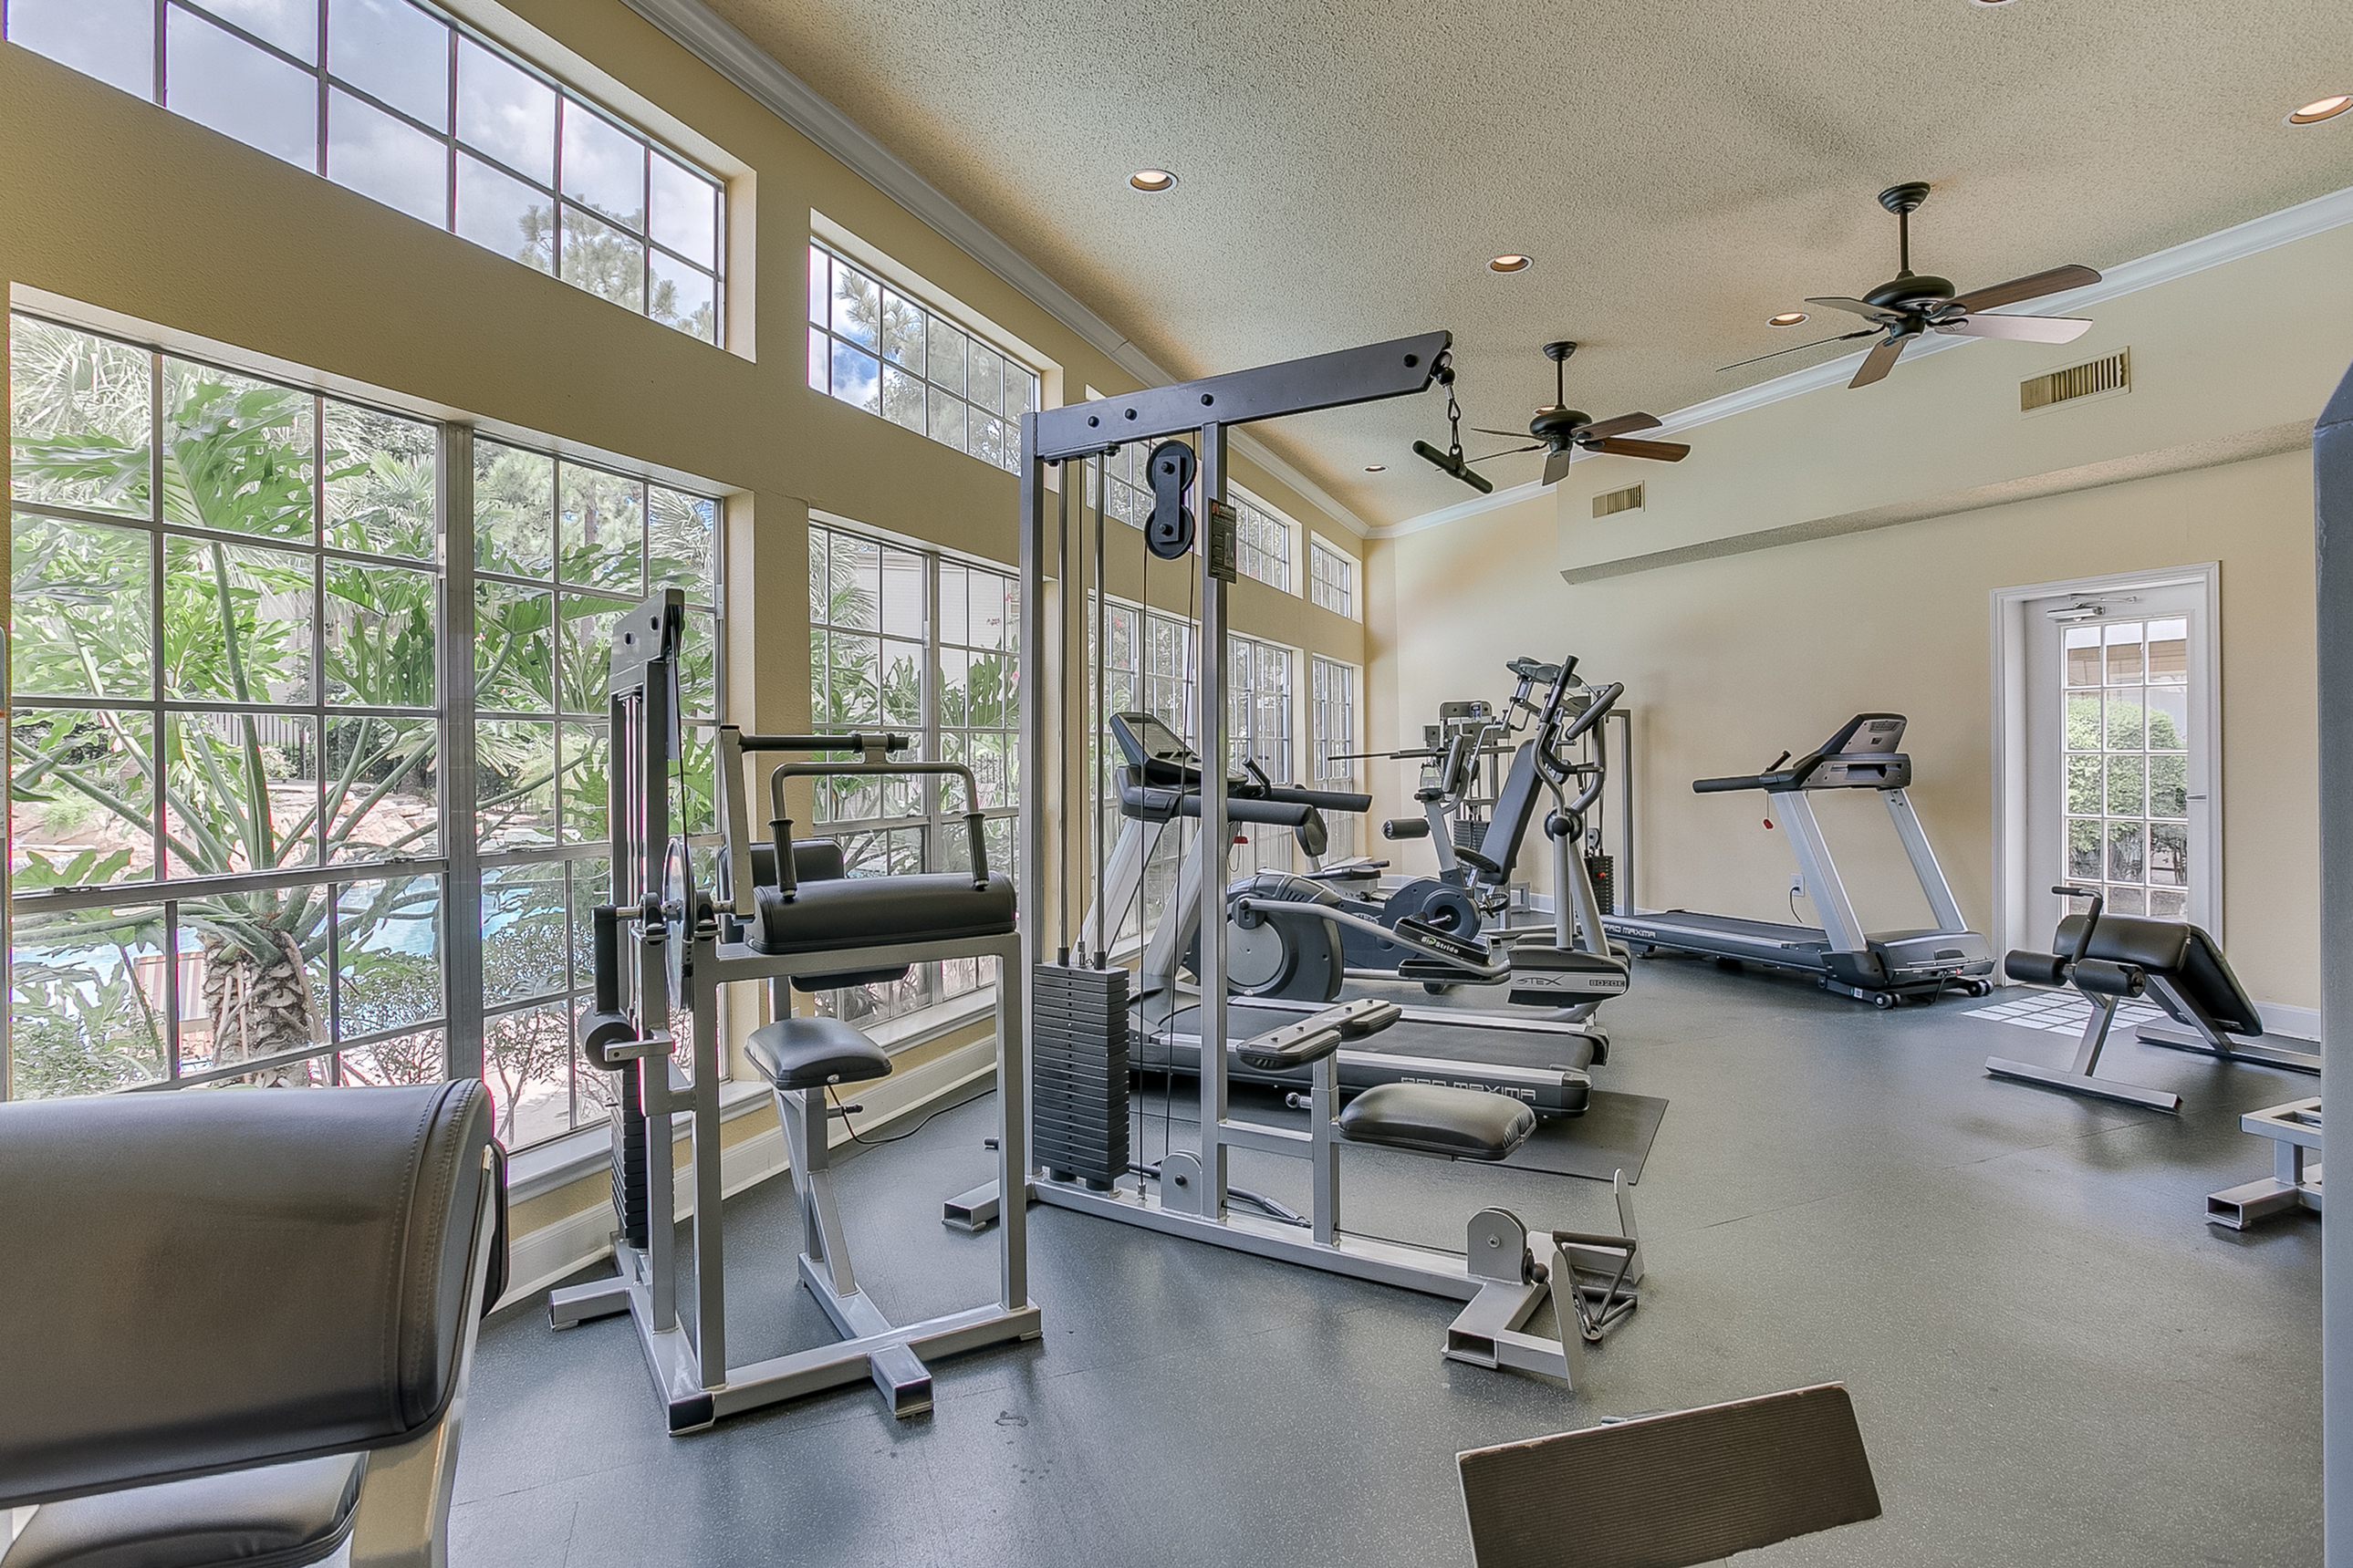 View of Fitness Center, Showing Cardio Machines, Cable Machines, and Window Views at The Regatta Apartments